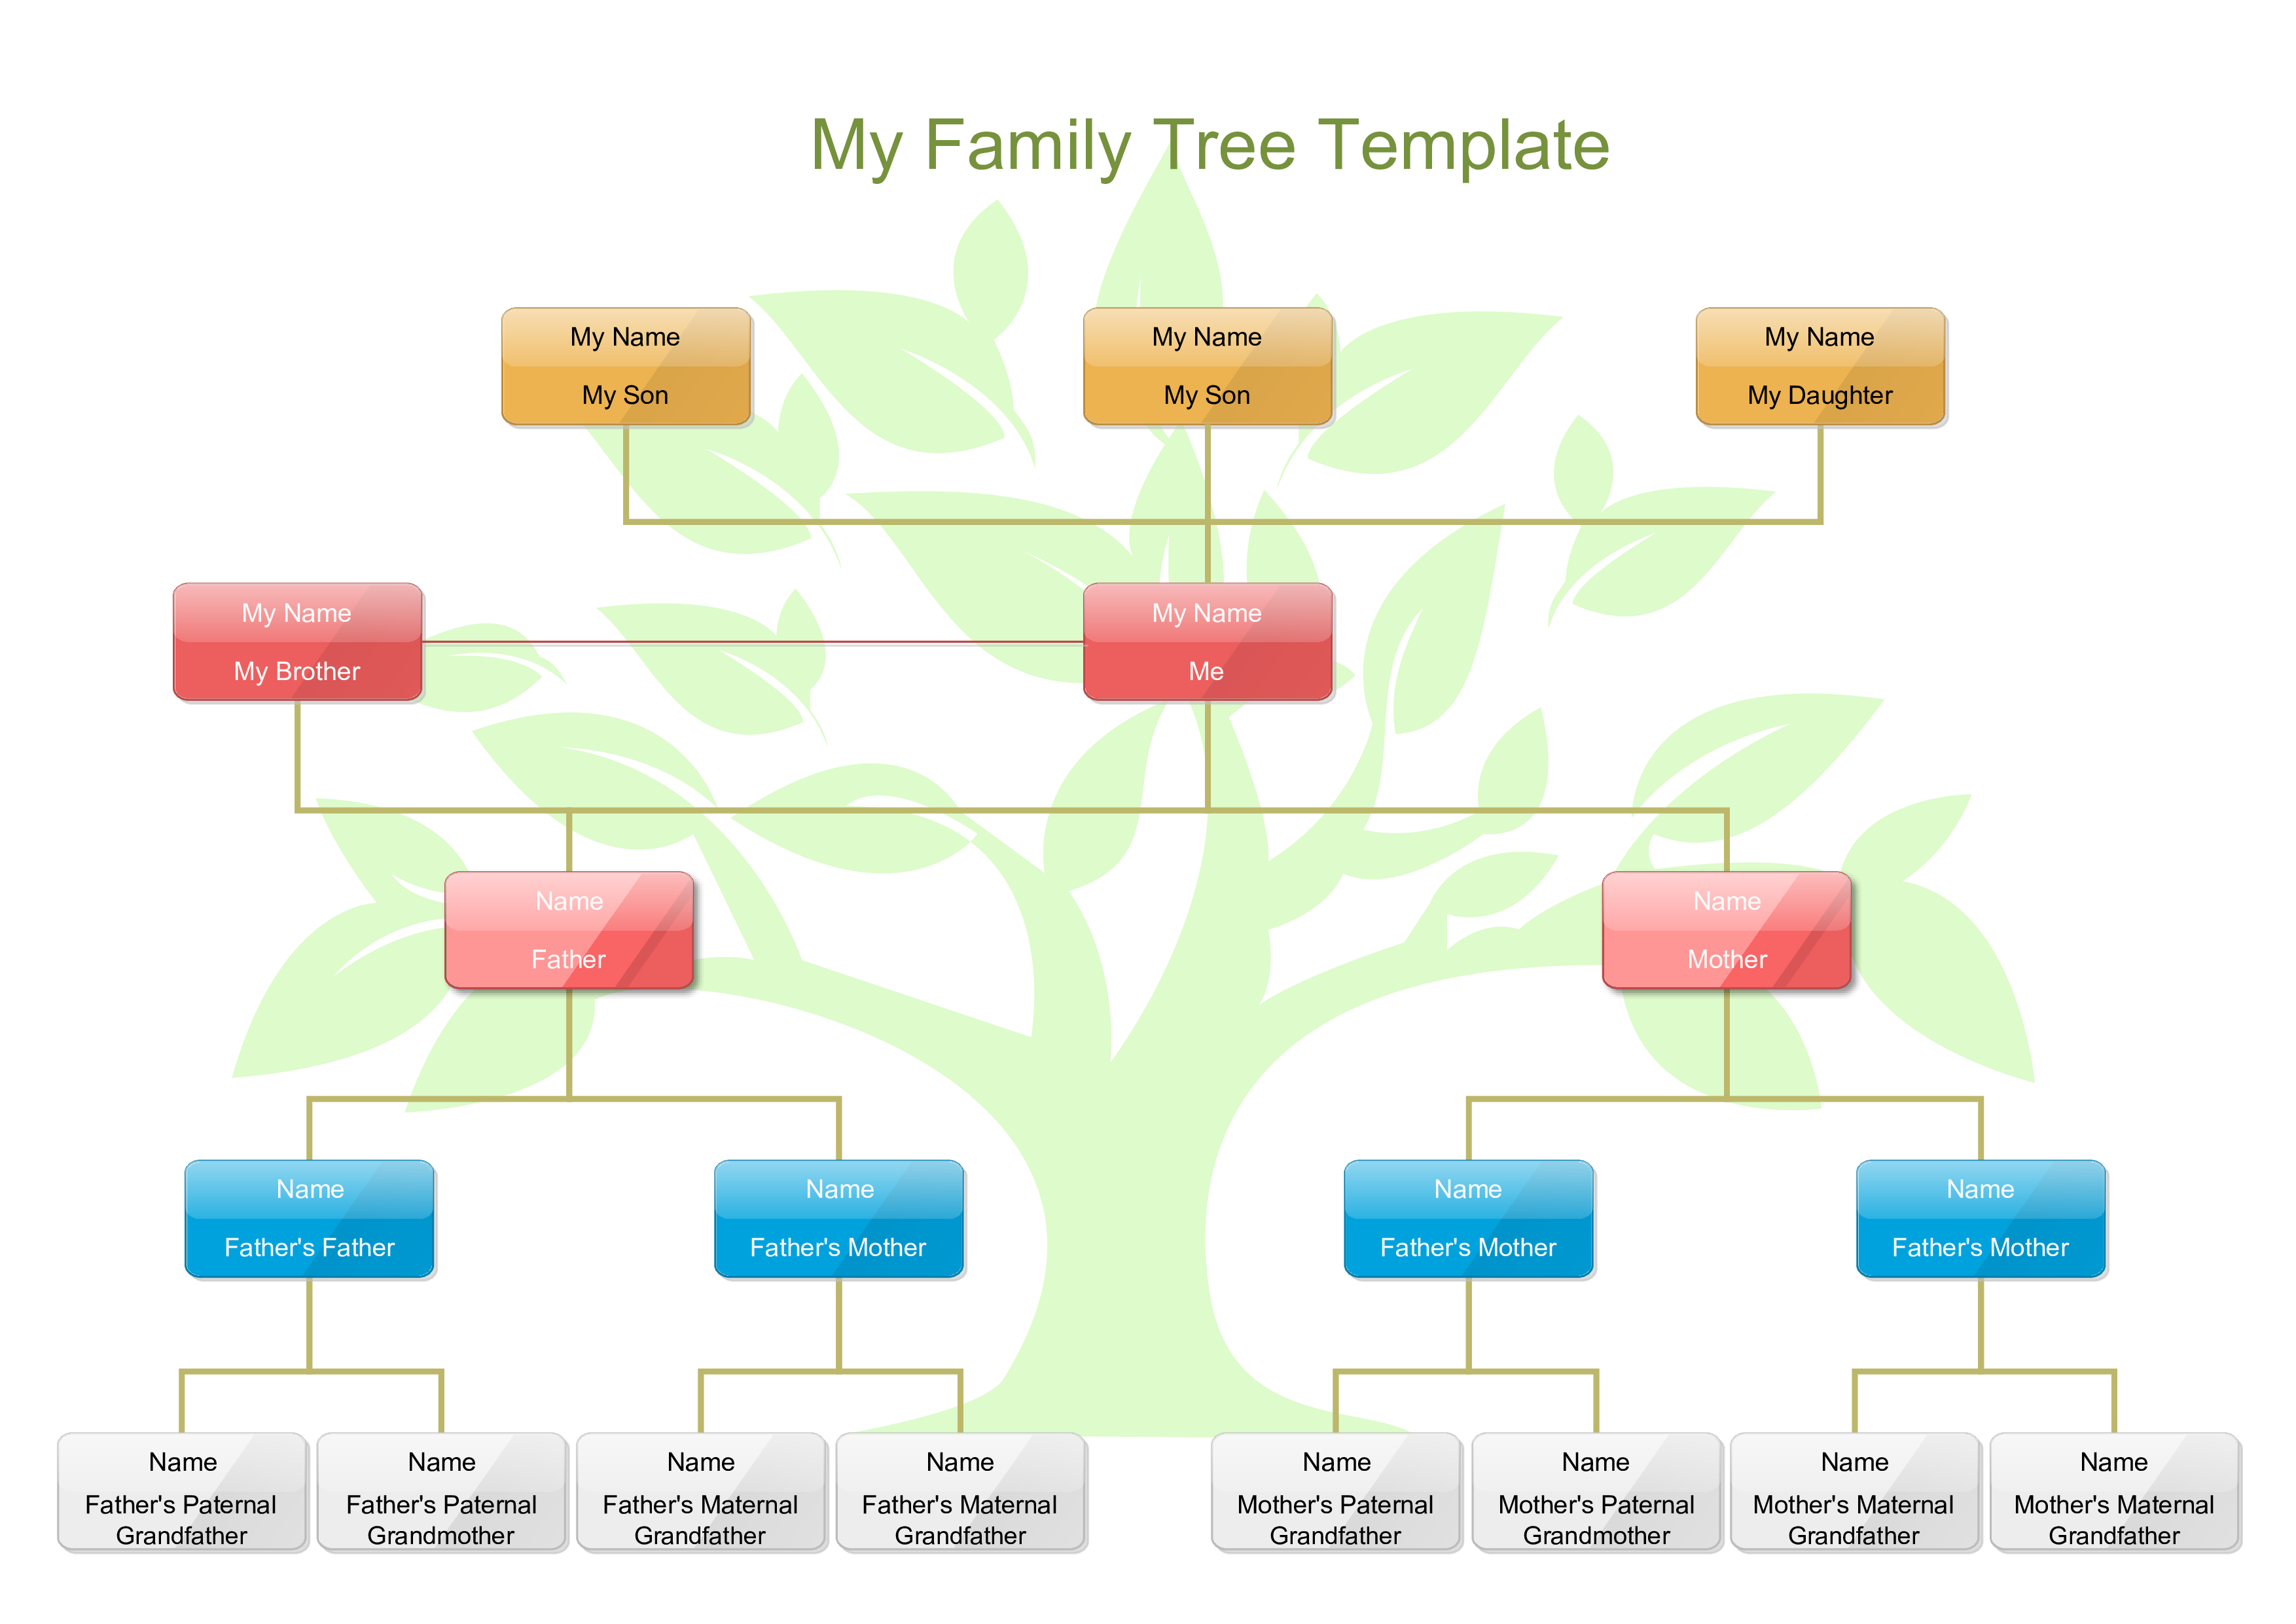 my-family-tree-template-for-kids-templates-at-allbusinesstemplates